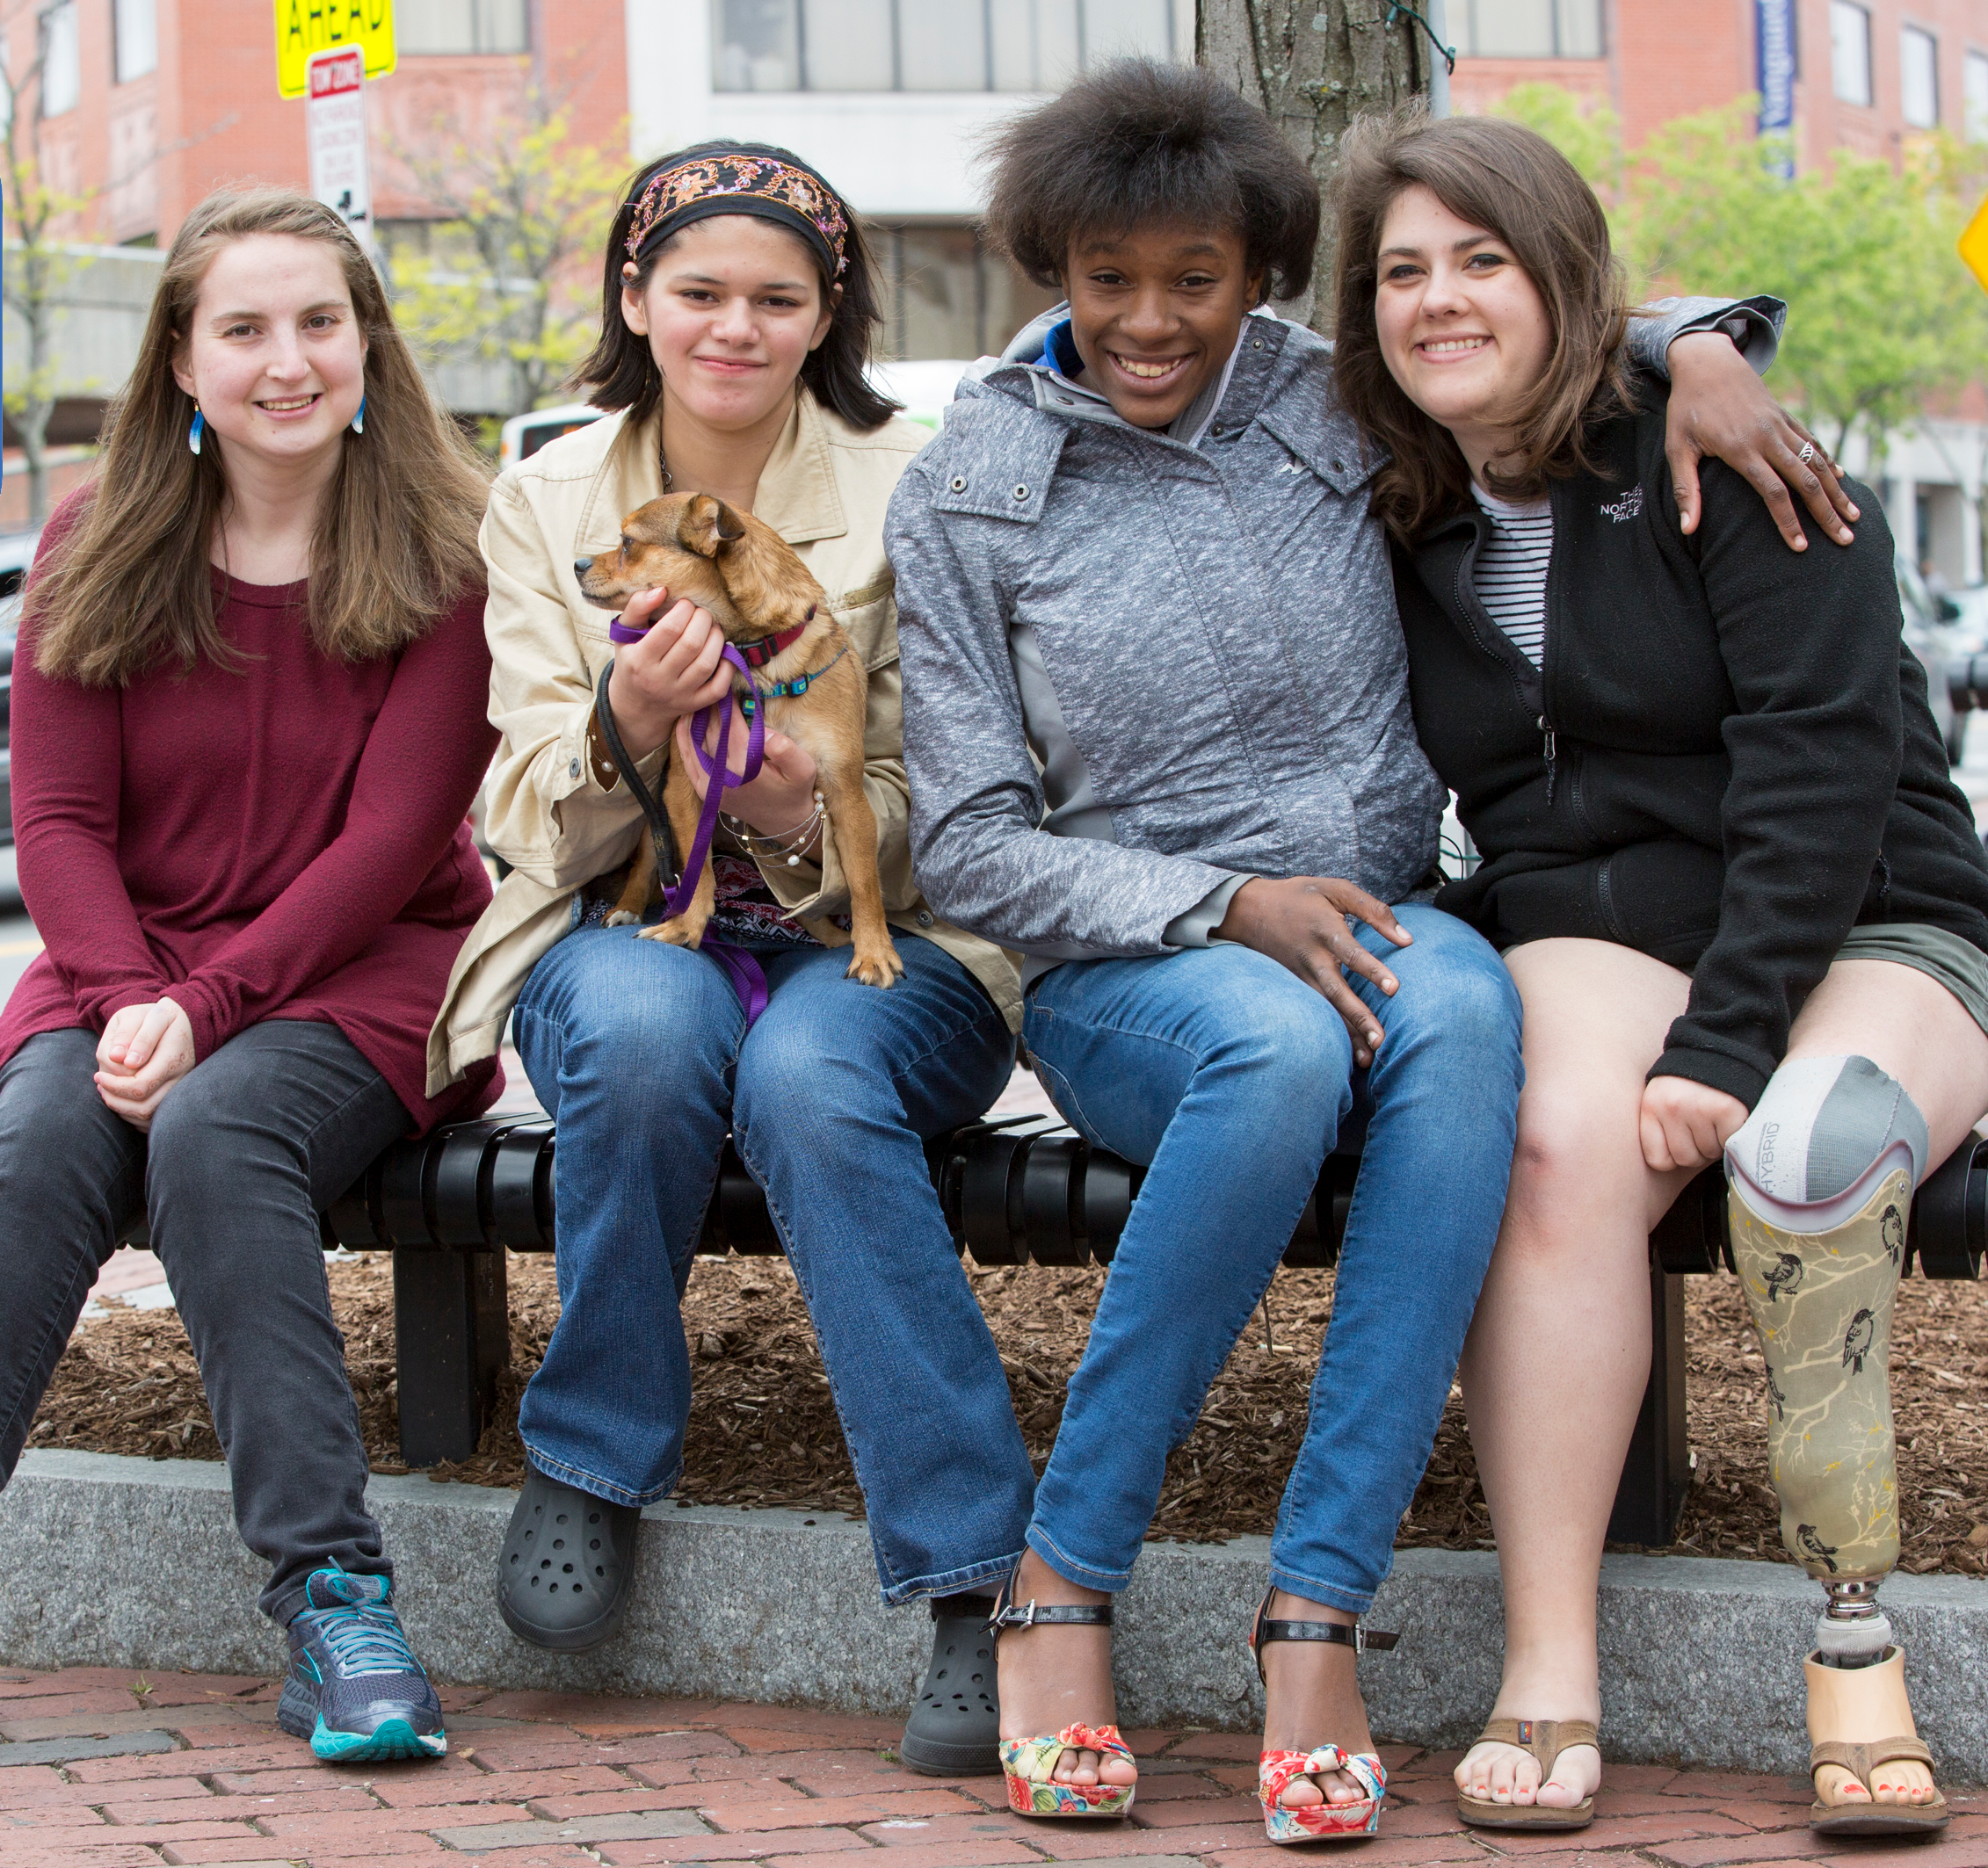 Four young women sit together on outdoor bench, one holds small dog, one has prosthetic leg